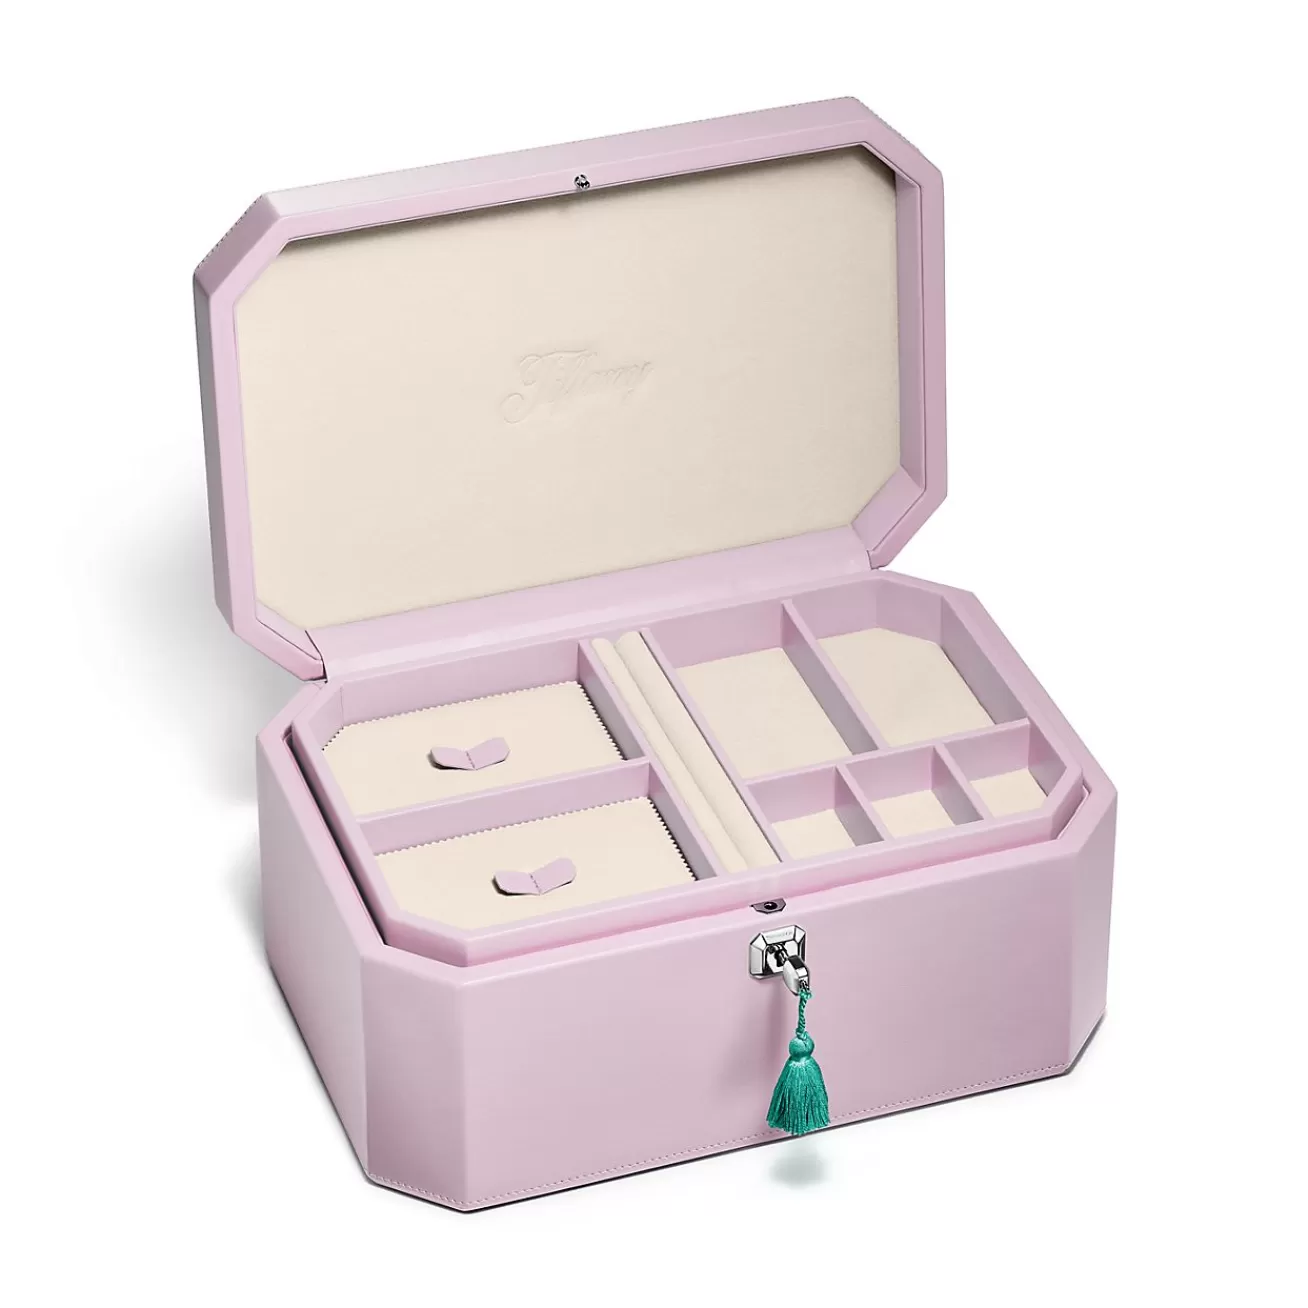 Tiffany & Co. Tiffany Facets Extra Large Jewelry Box in Kunzite-colored Leather | ^ Decor